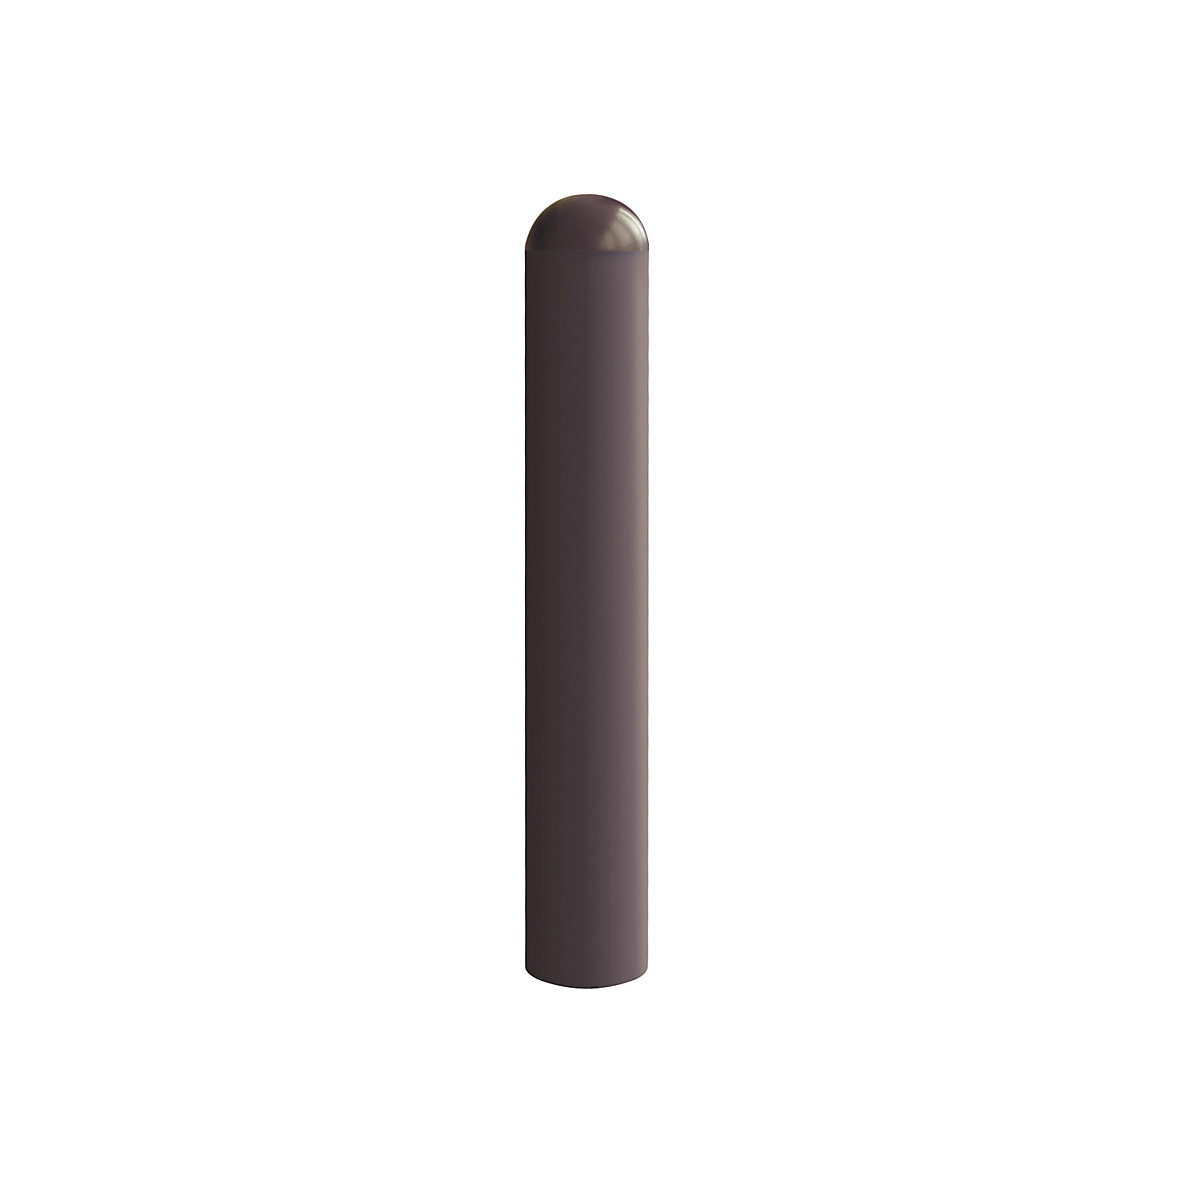 City bollard, height 1250 mm, for concreting in, Ø 90 mm, 1 chain eyelet-6